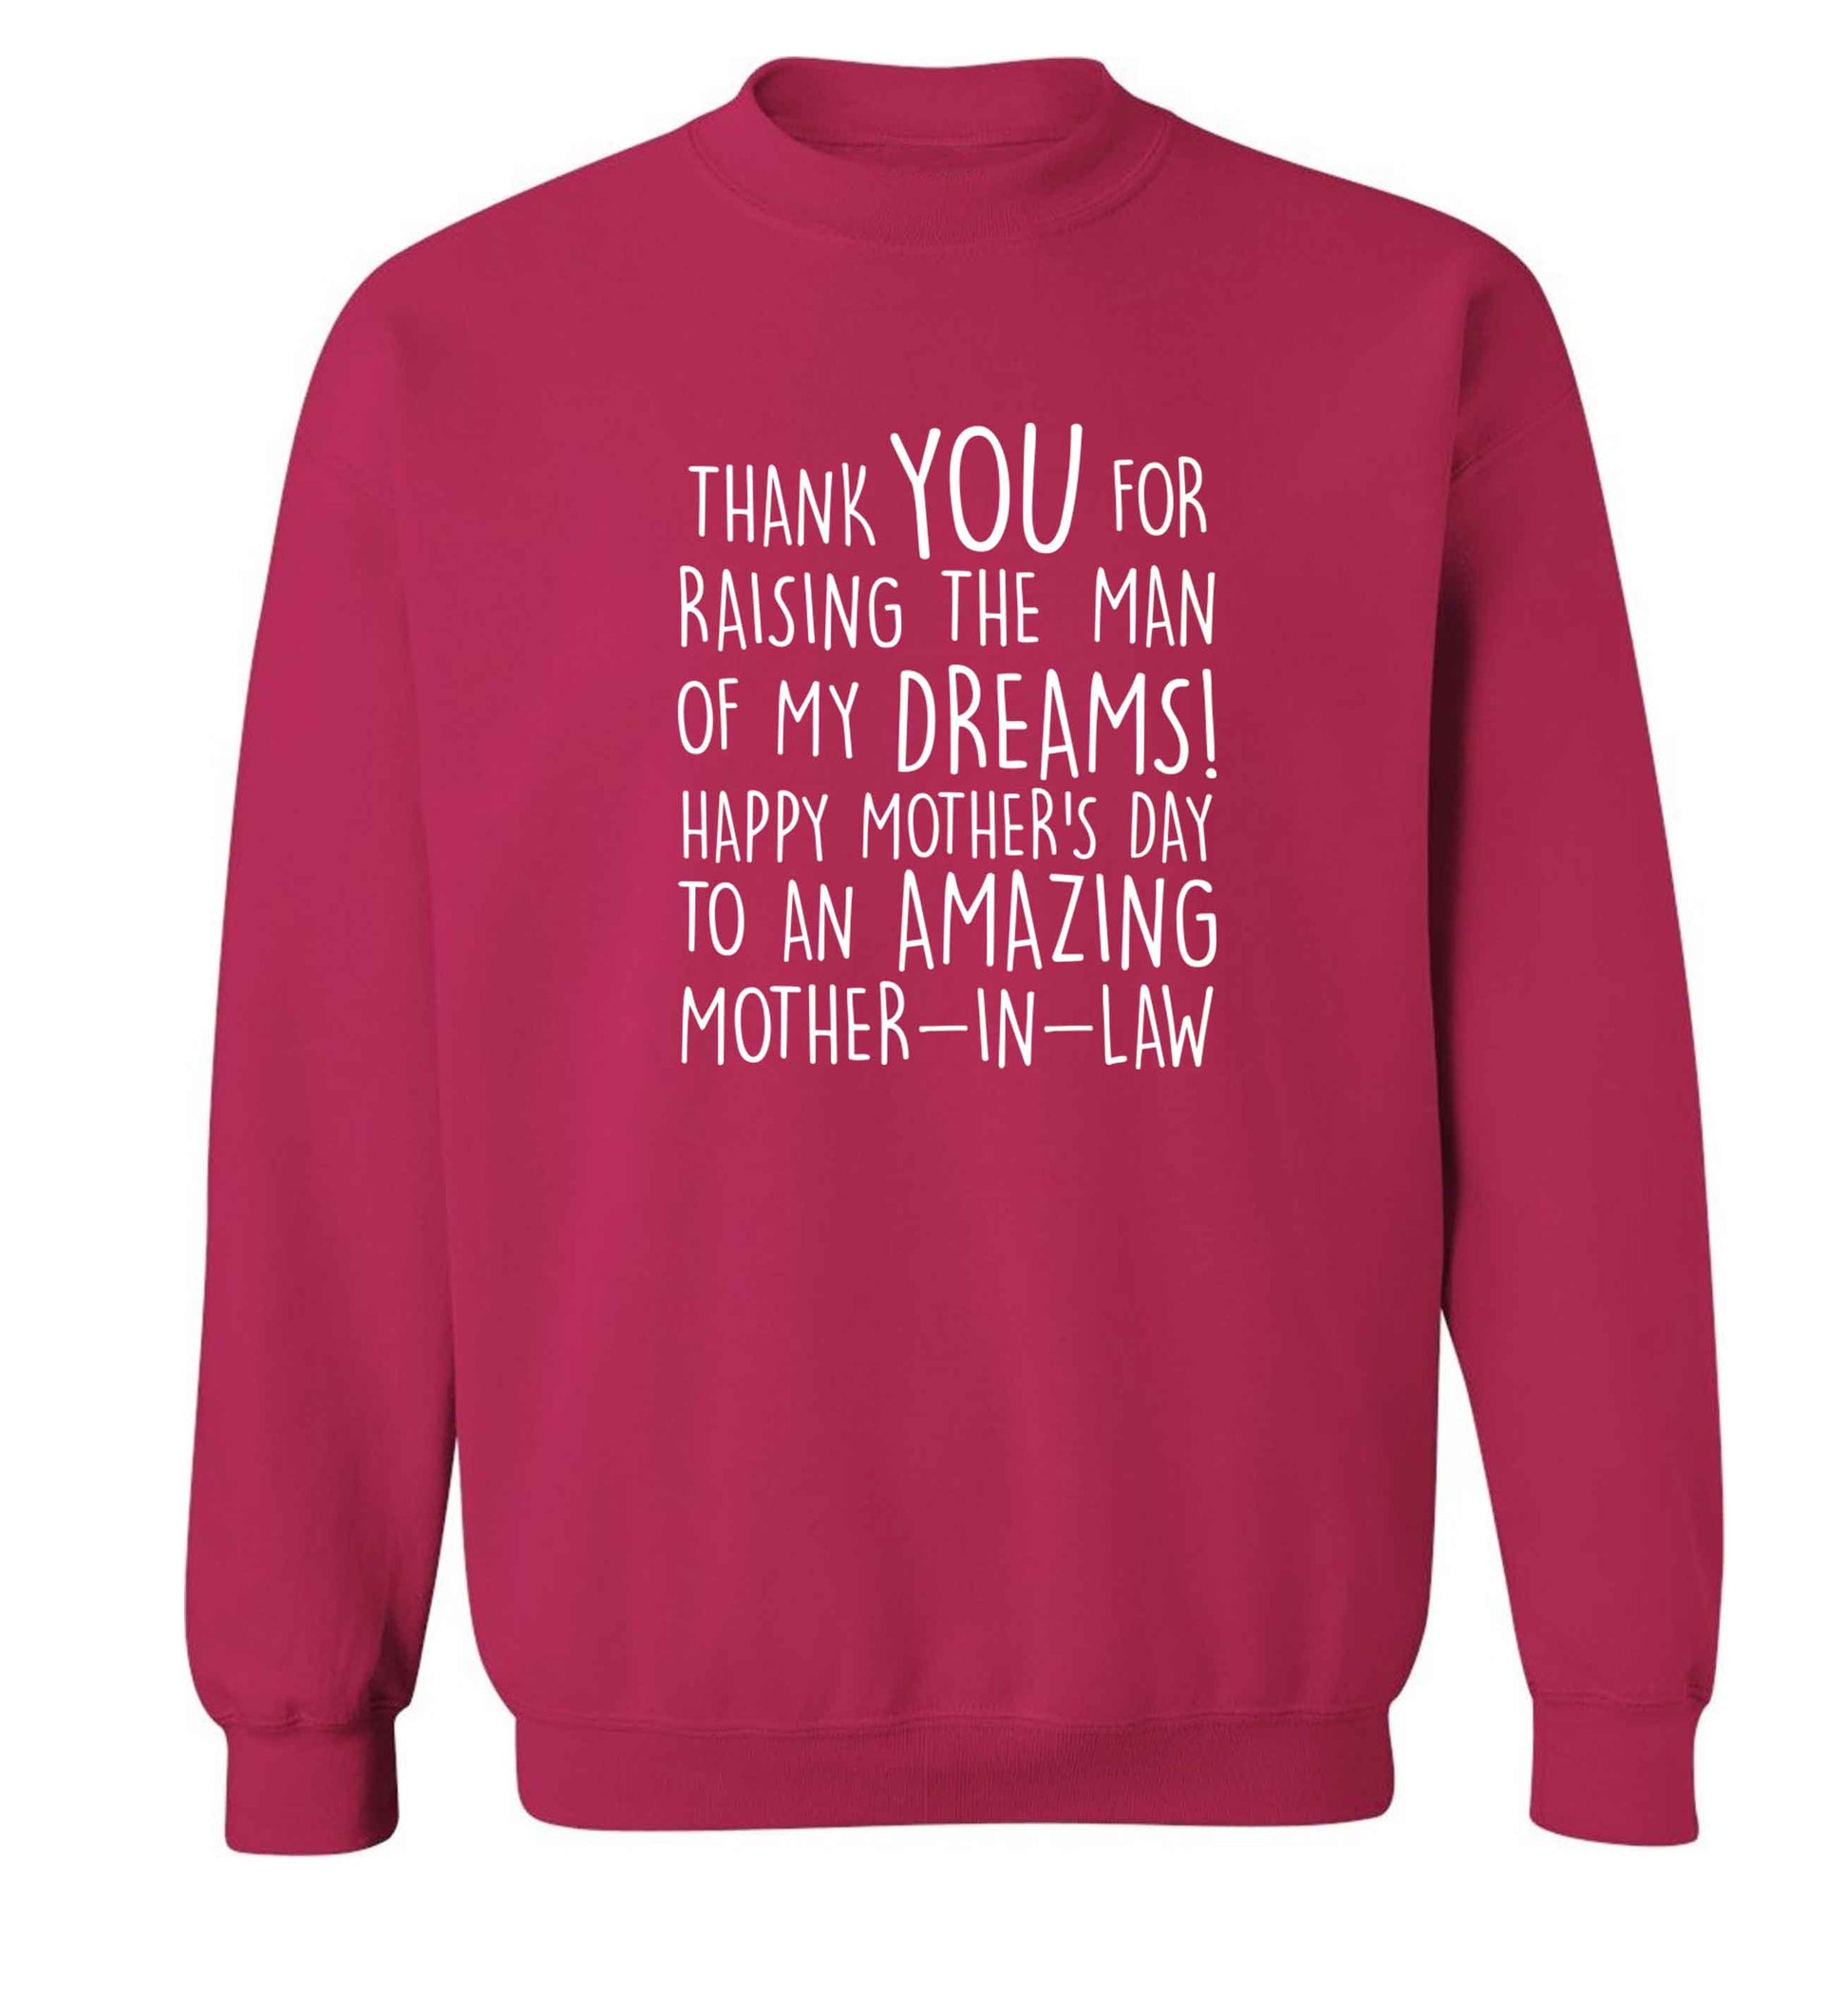 Raising the man of my dreams mother's day mother-in-law adult's unisex pink sweater 2XL